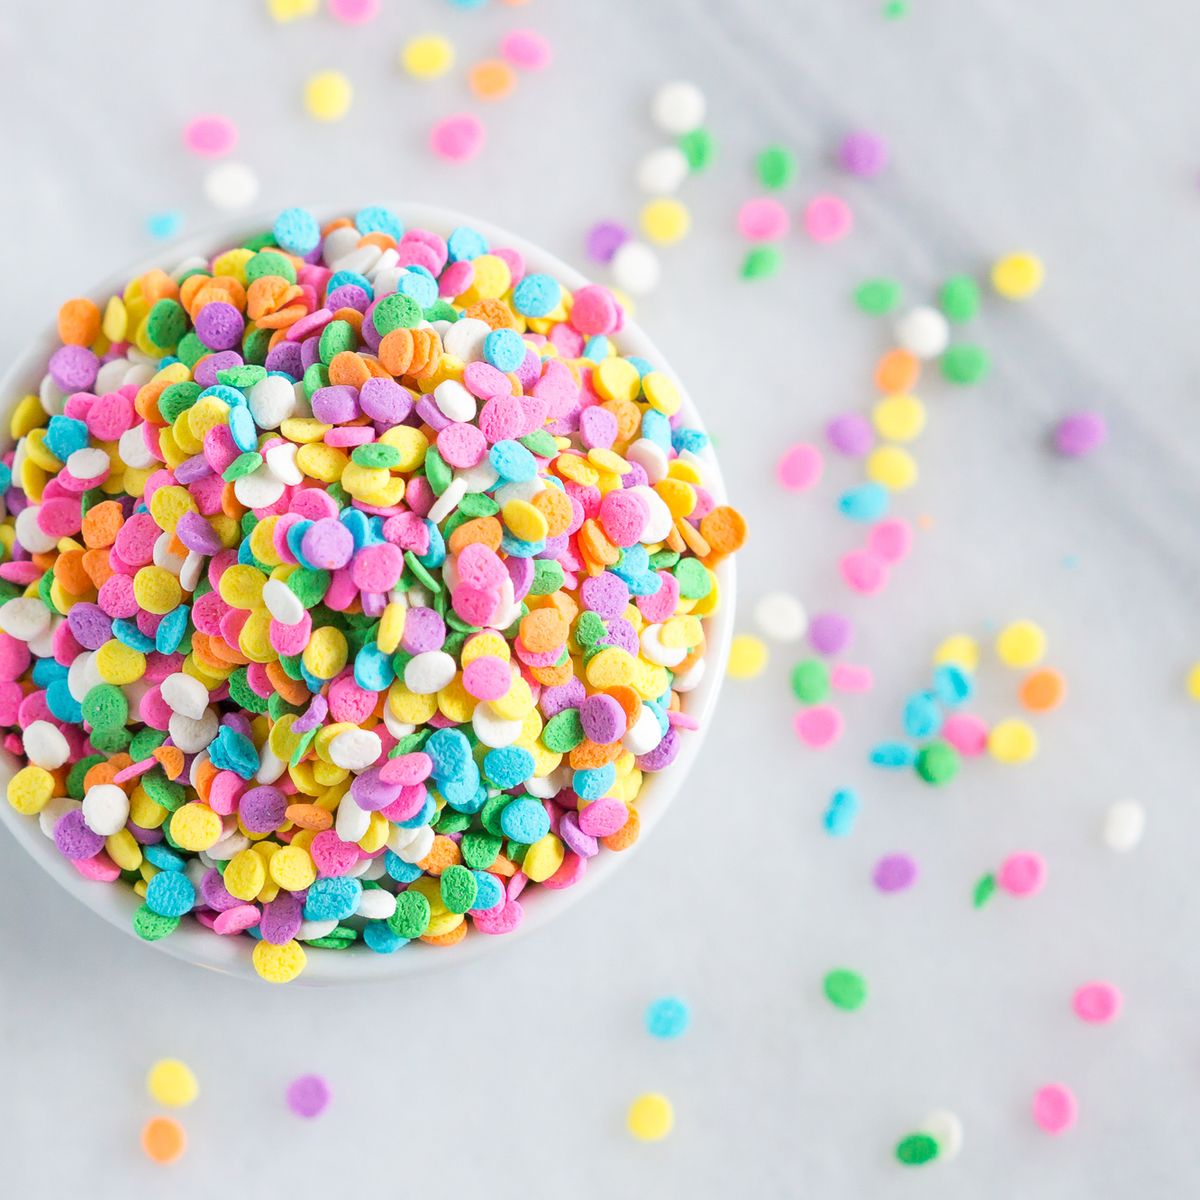 Heart Shape Made From Colorful Nonpareils Sprinkle Decorations